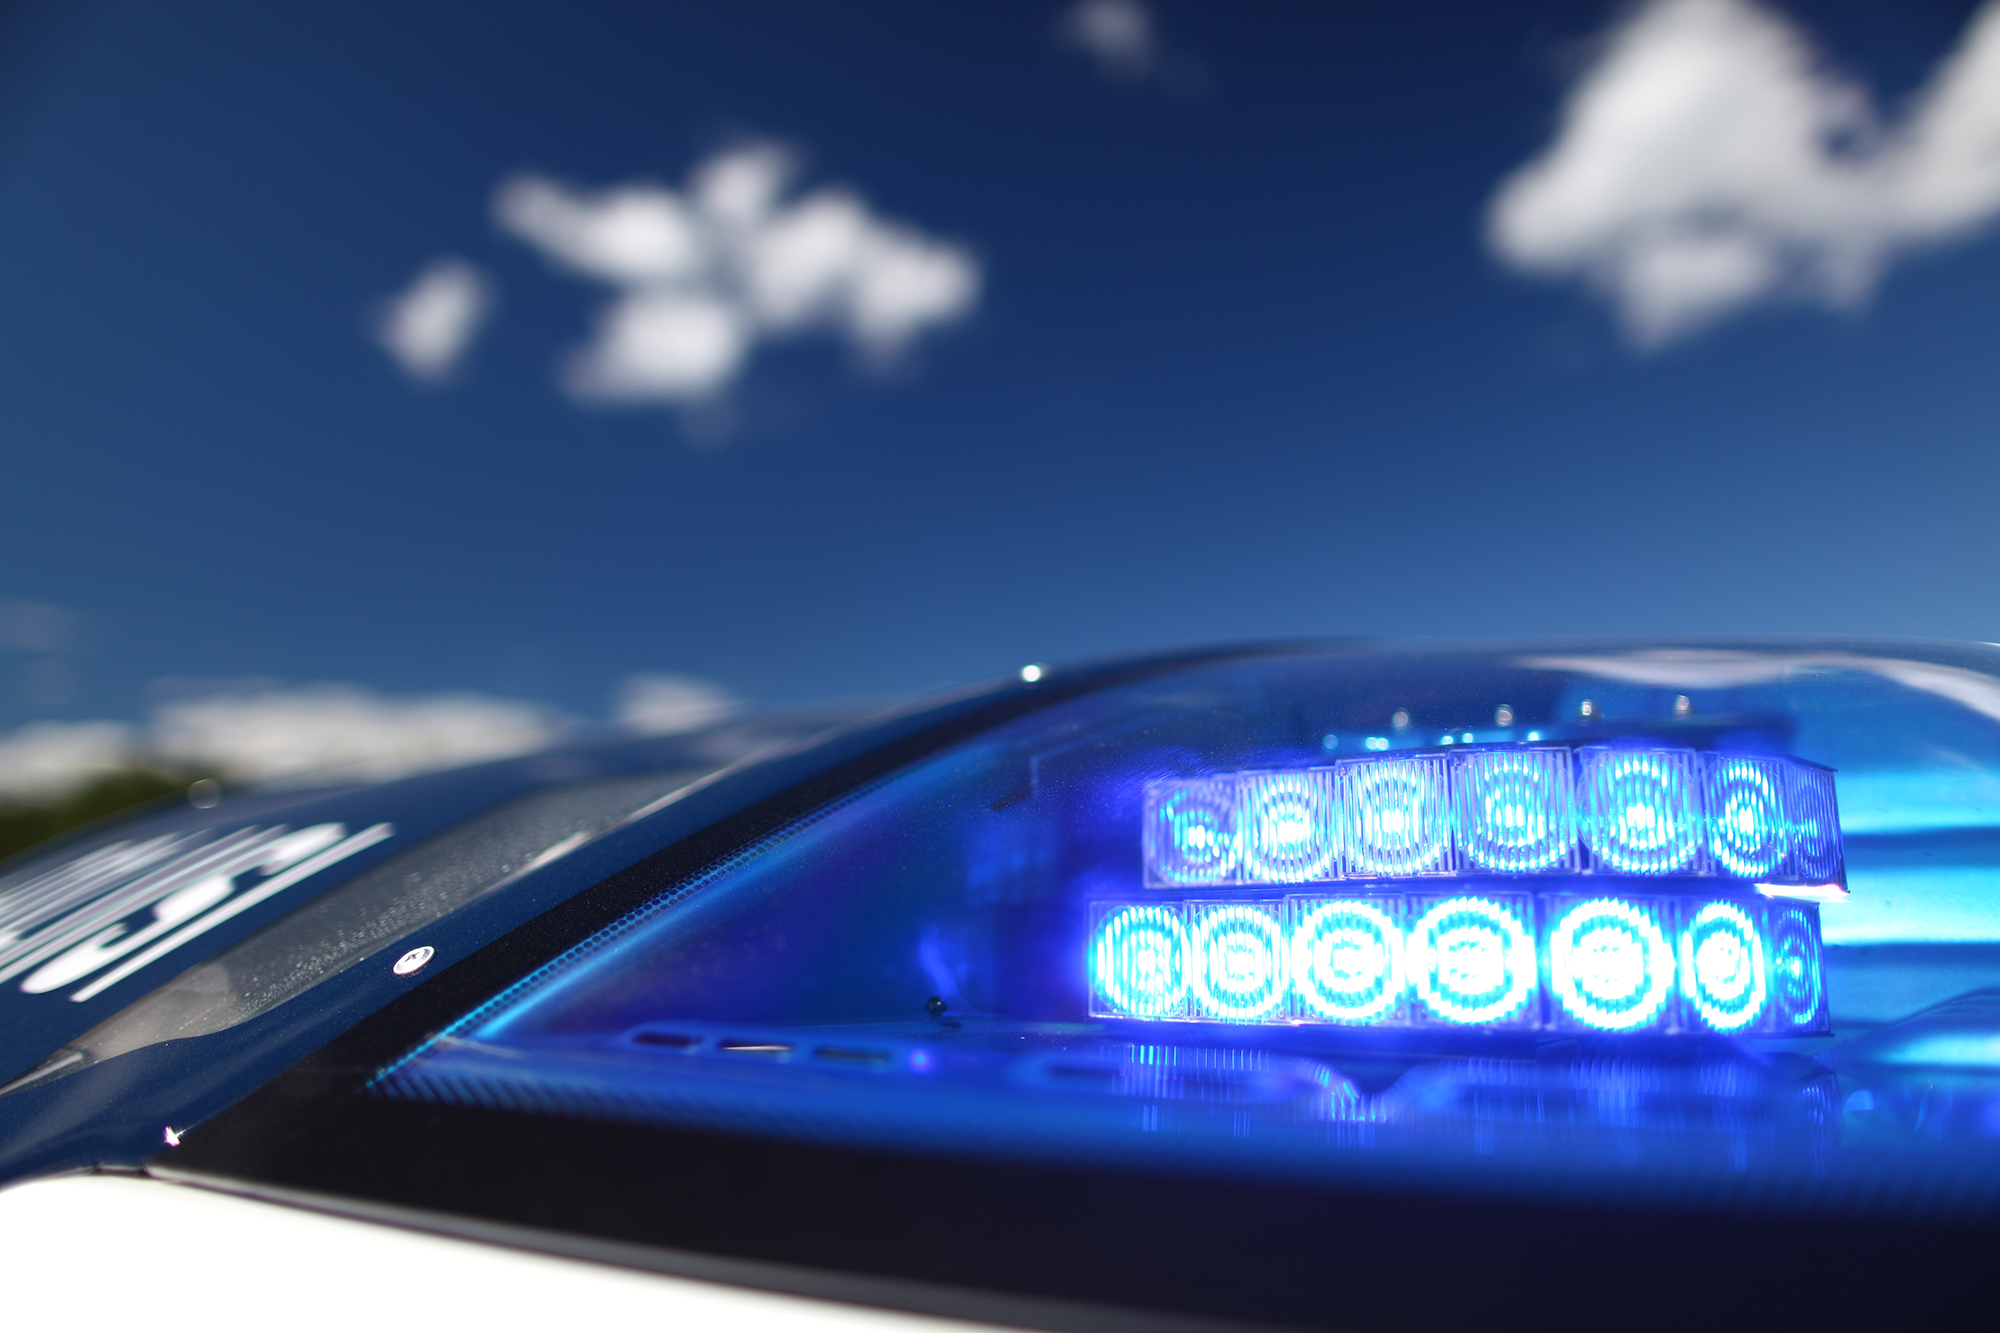 A close-up image of a police car’s flashing light, with blue sky in the background.